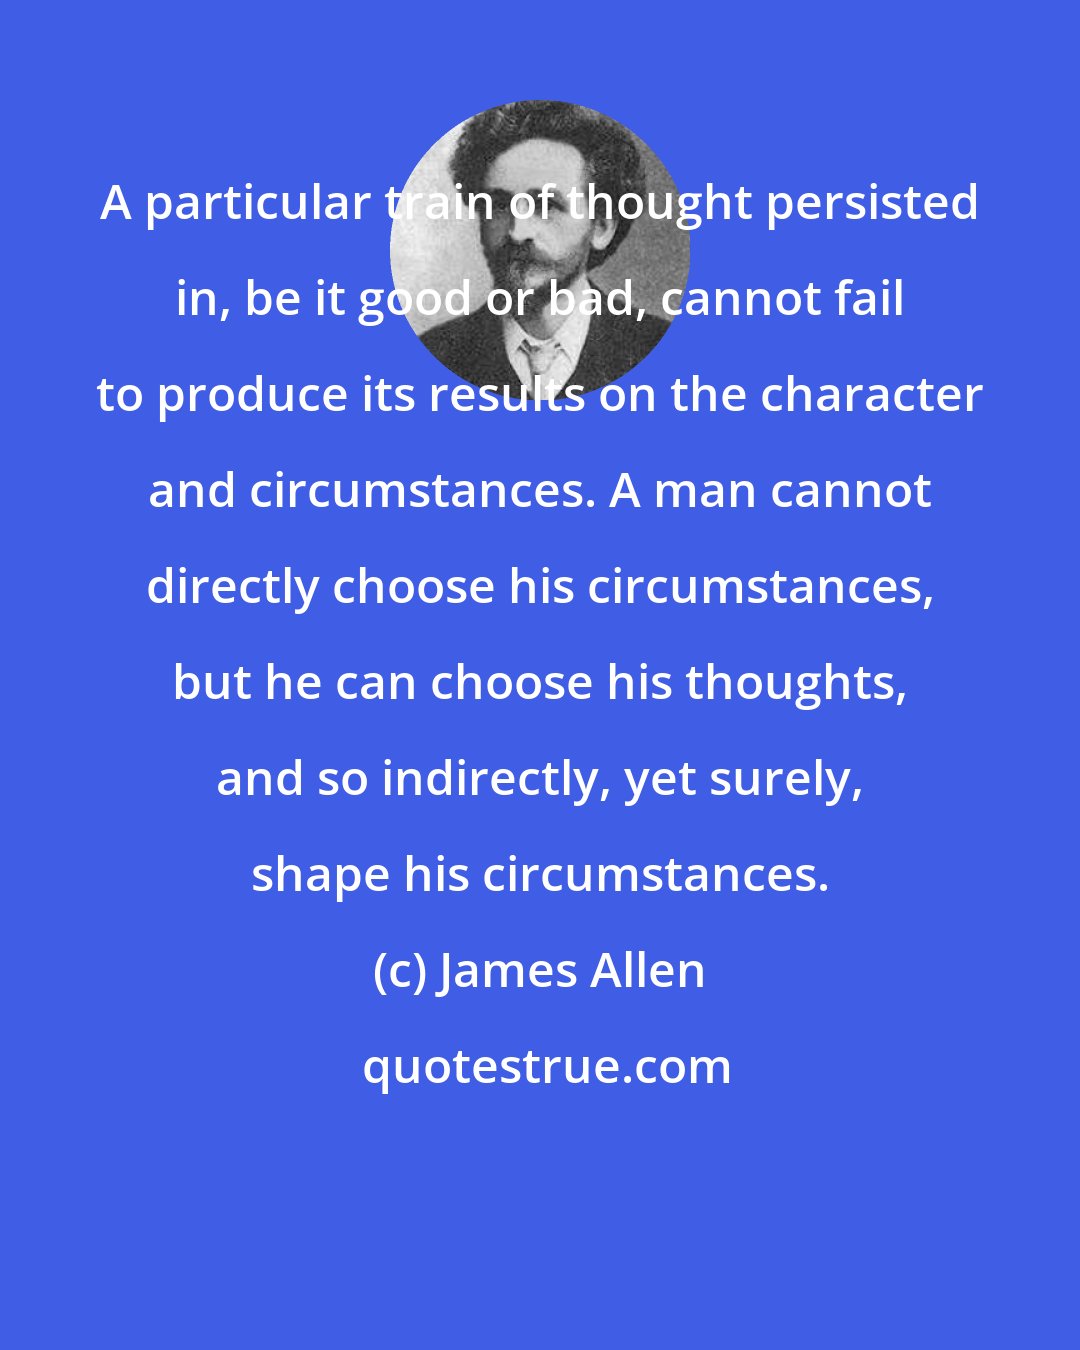 James Allen: A particular train of thought persisted in, be it good or bad, cannot fail to produce its results on the character and circumstances. A man cannot directly choose his circumstances, but he can choose his thoughts, and so indirectly, yet surely, shape his circumstances.